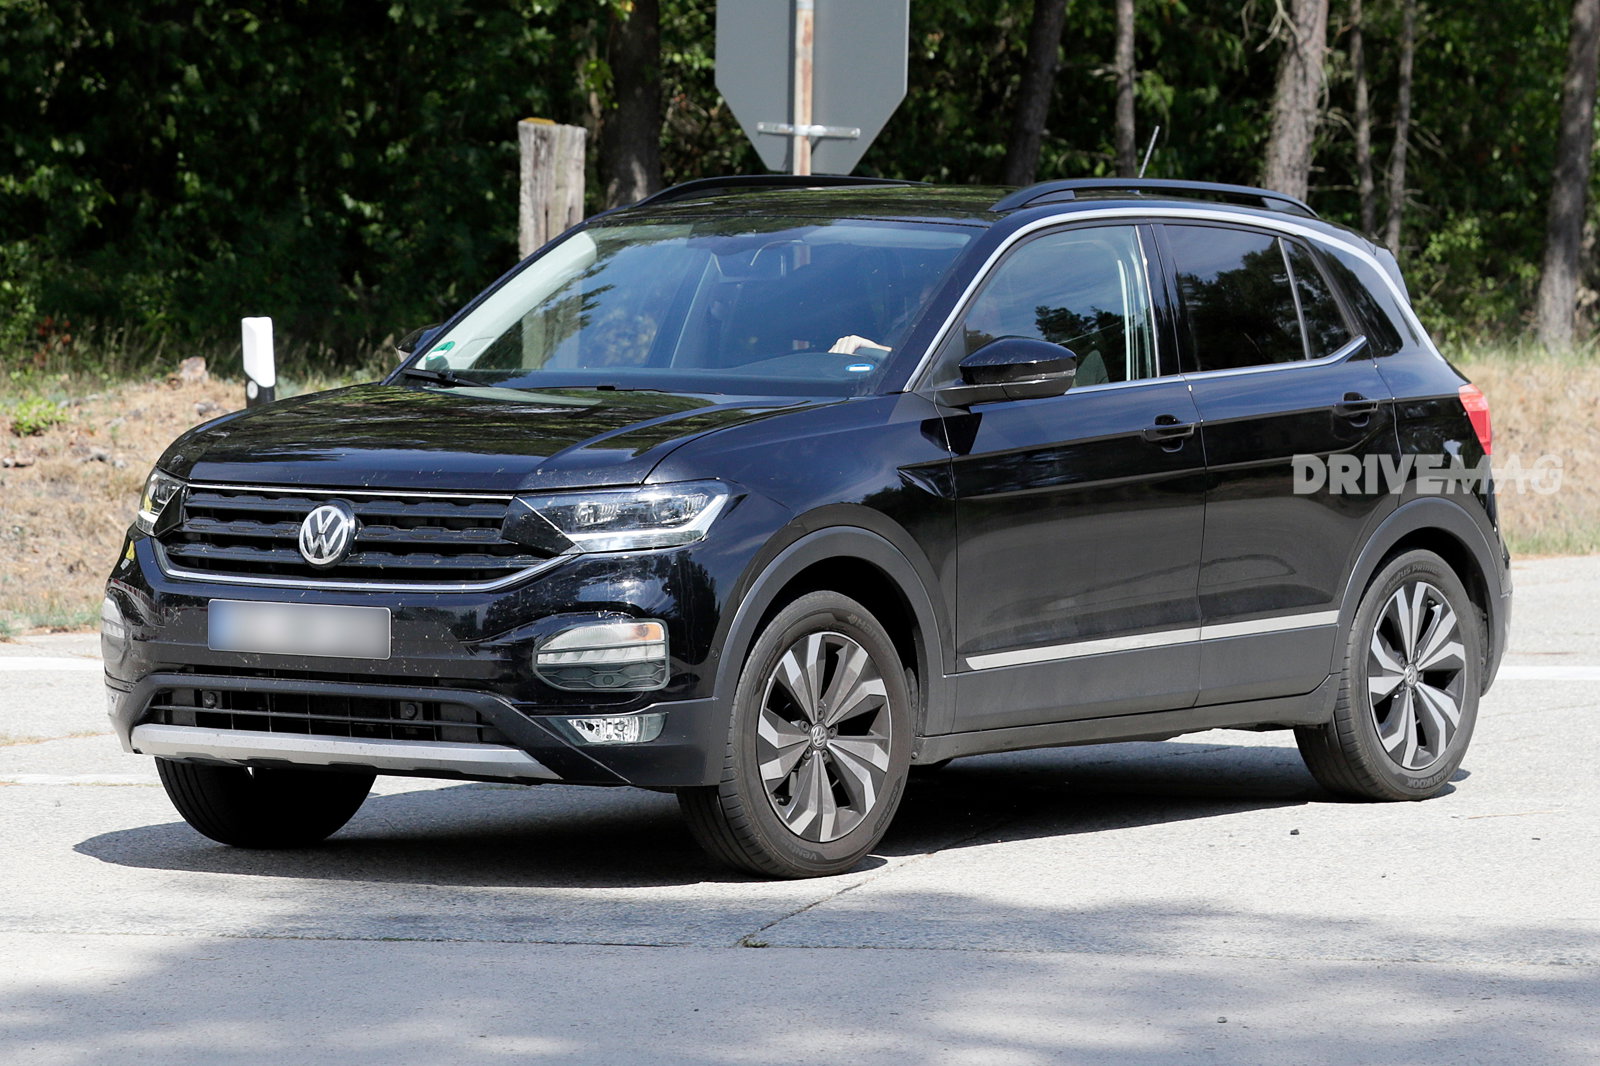 Volkswagen T-Cross review: more than another jacked-up supermini